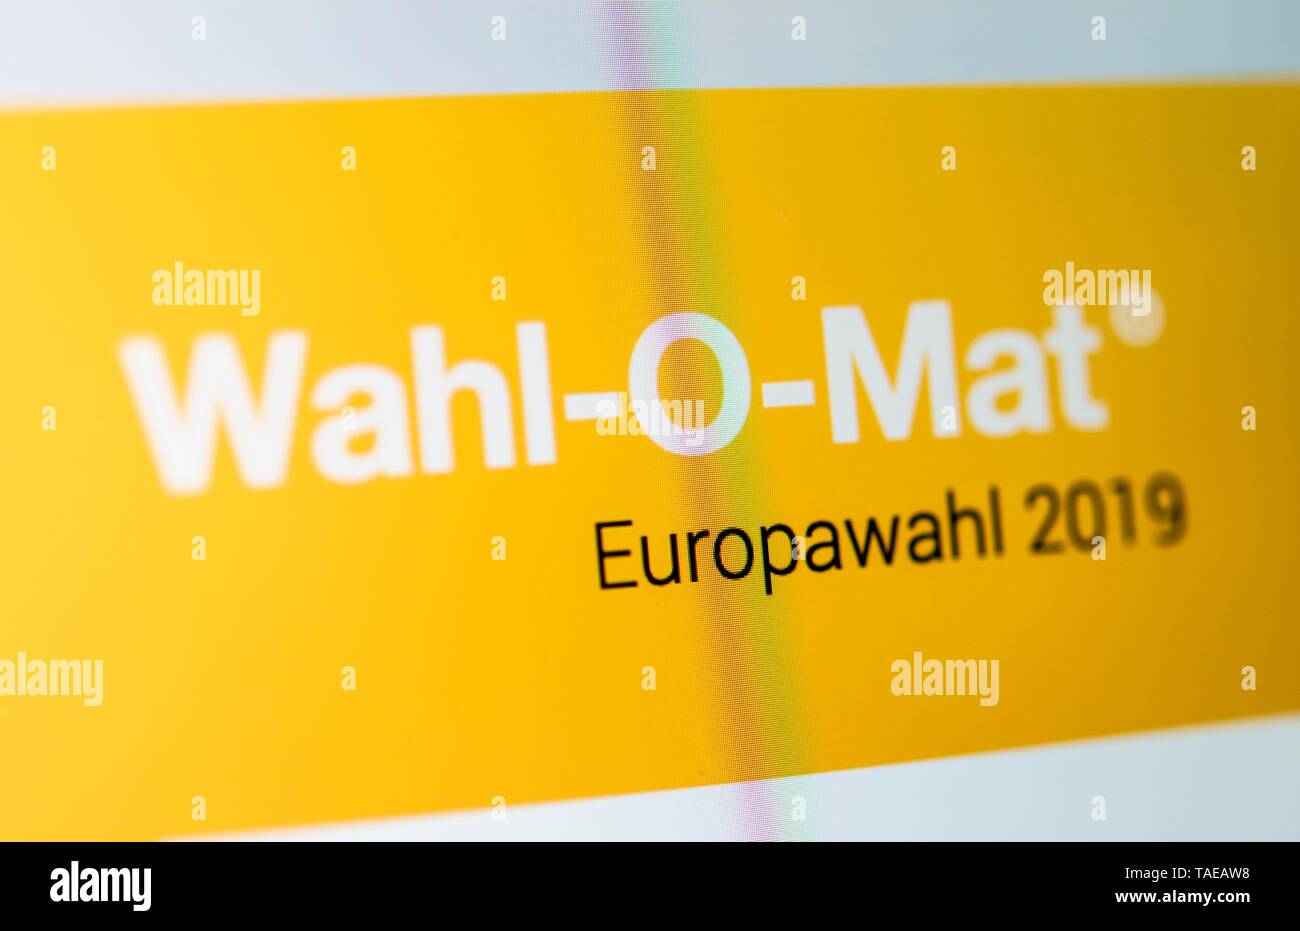 Wahl-O-Mat, European elections 2019, Germany Stock Photo